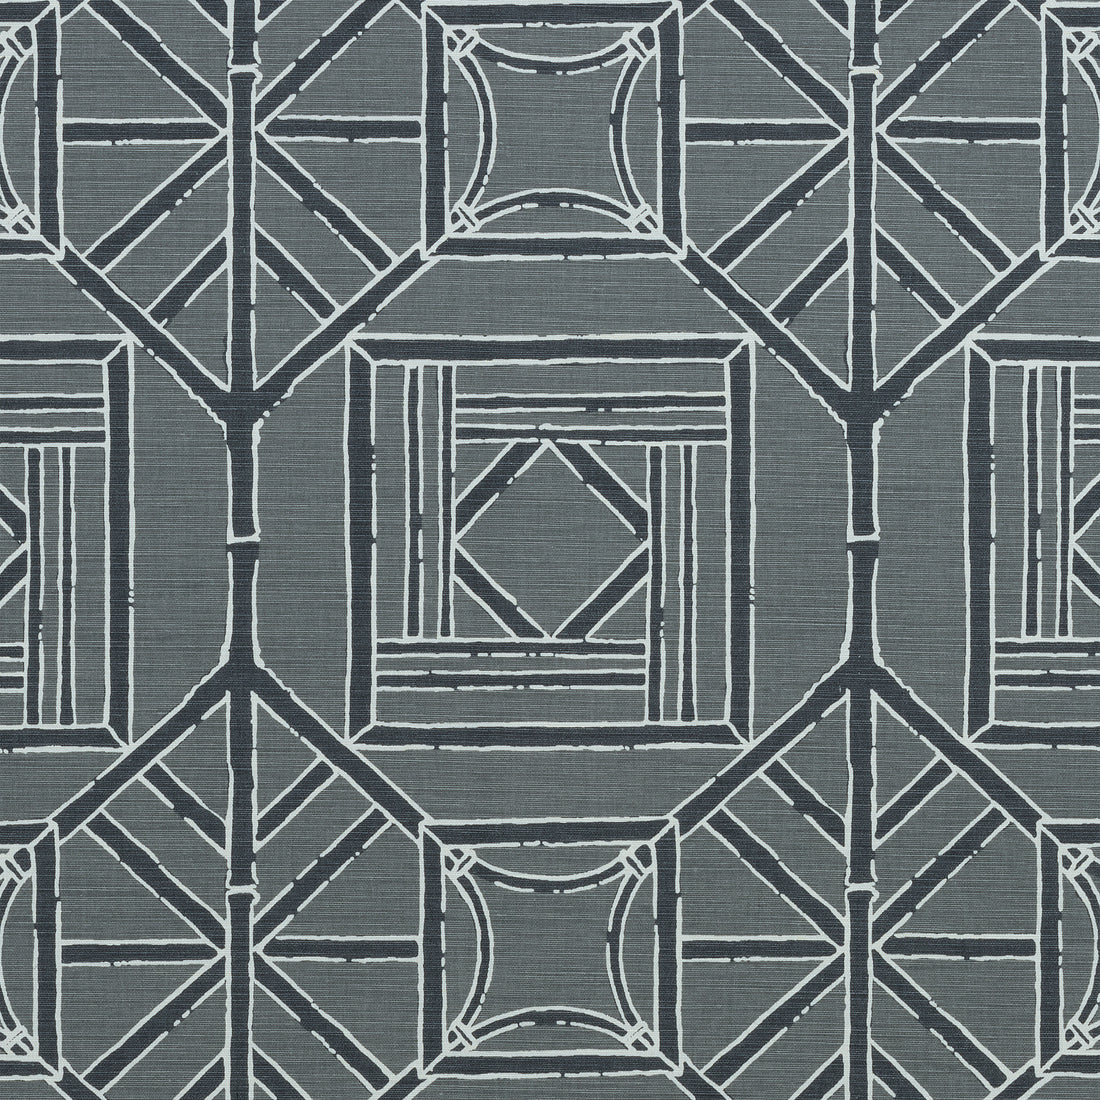 Shoji Panel fabric in grey color - pattern number F975520 - by Thibaut in the Dynasty collection